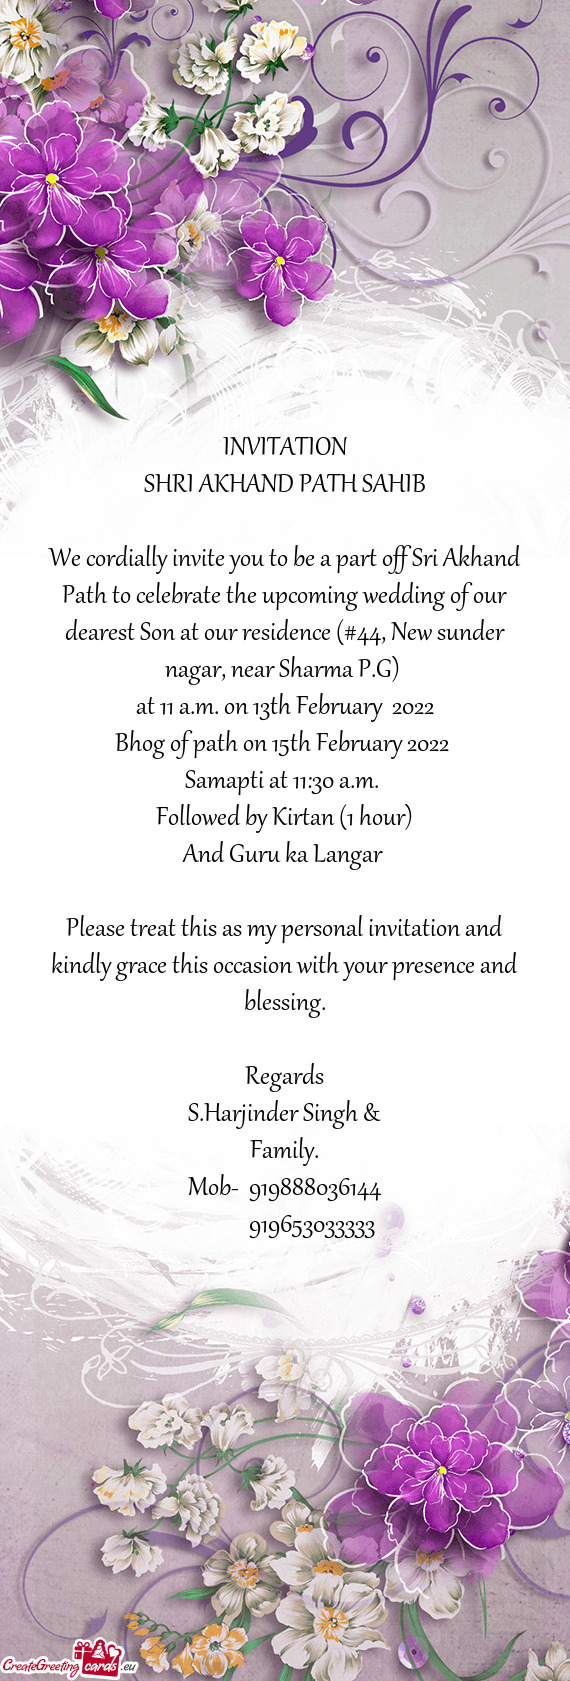 We cordially invite you to be a part off Sri Akhand Path to celebrate the upcoming wedding of our de